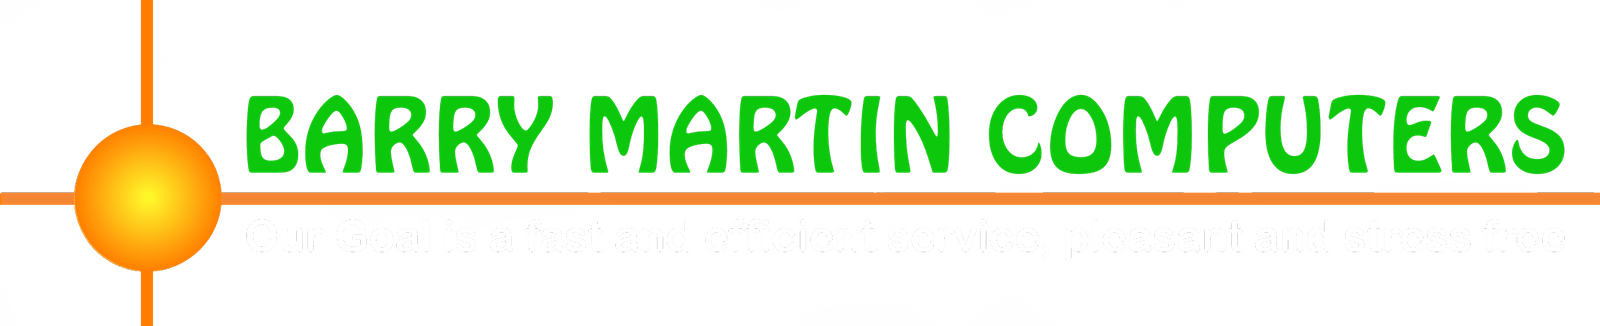 Barry Martin Computers Logo, showing Our goal is a fast and efficient service, pleasant and stress free